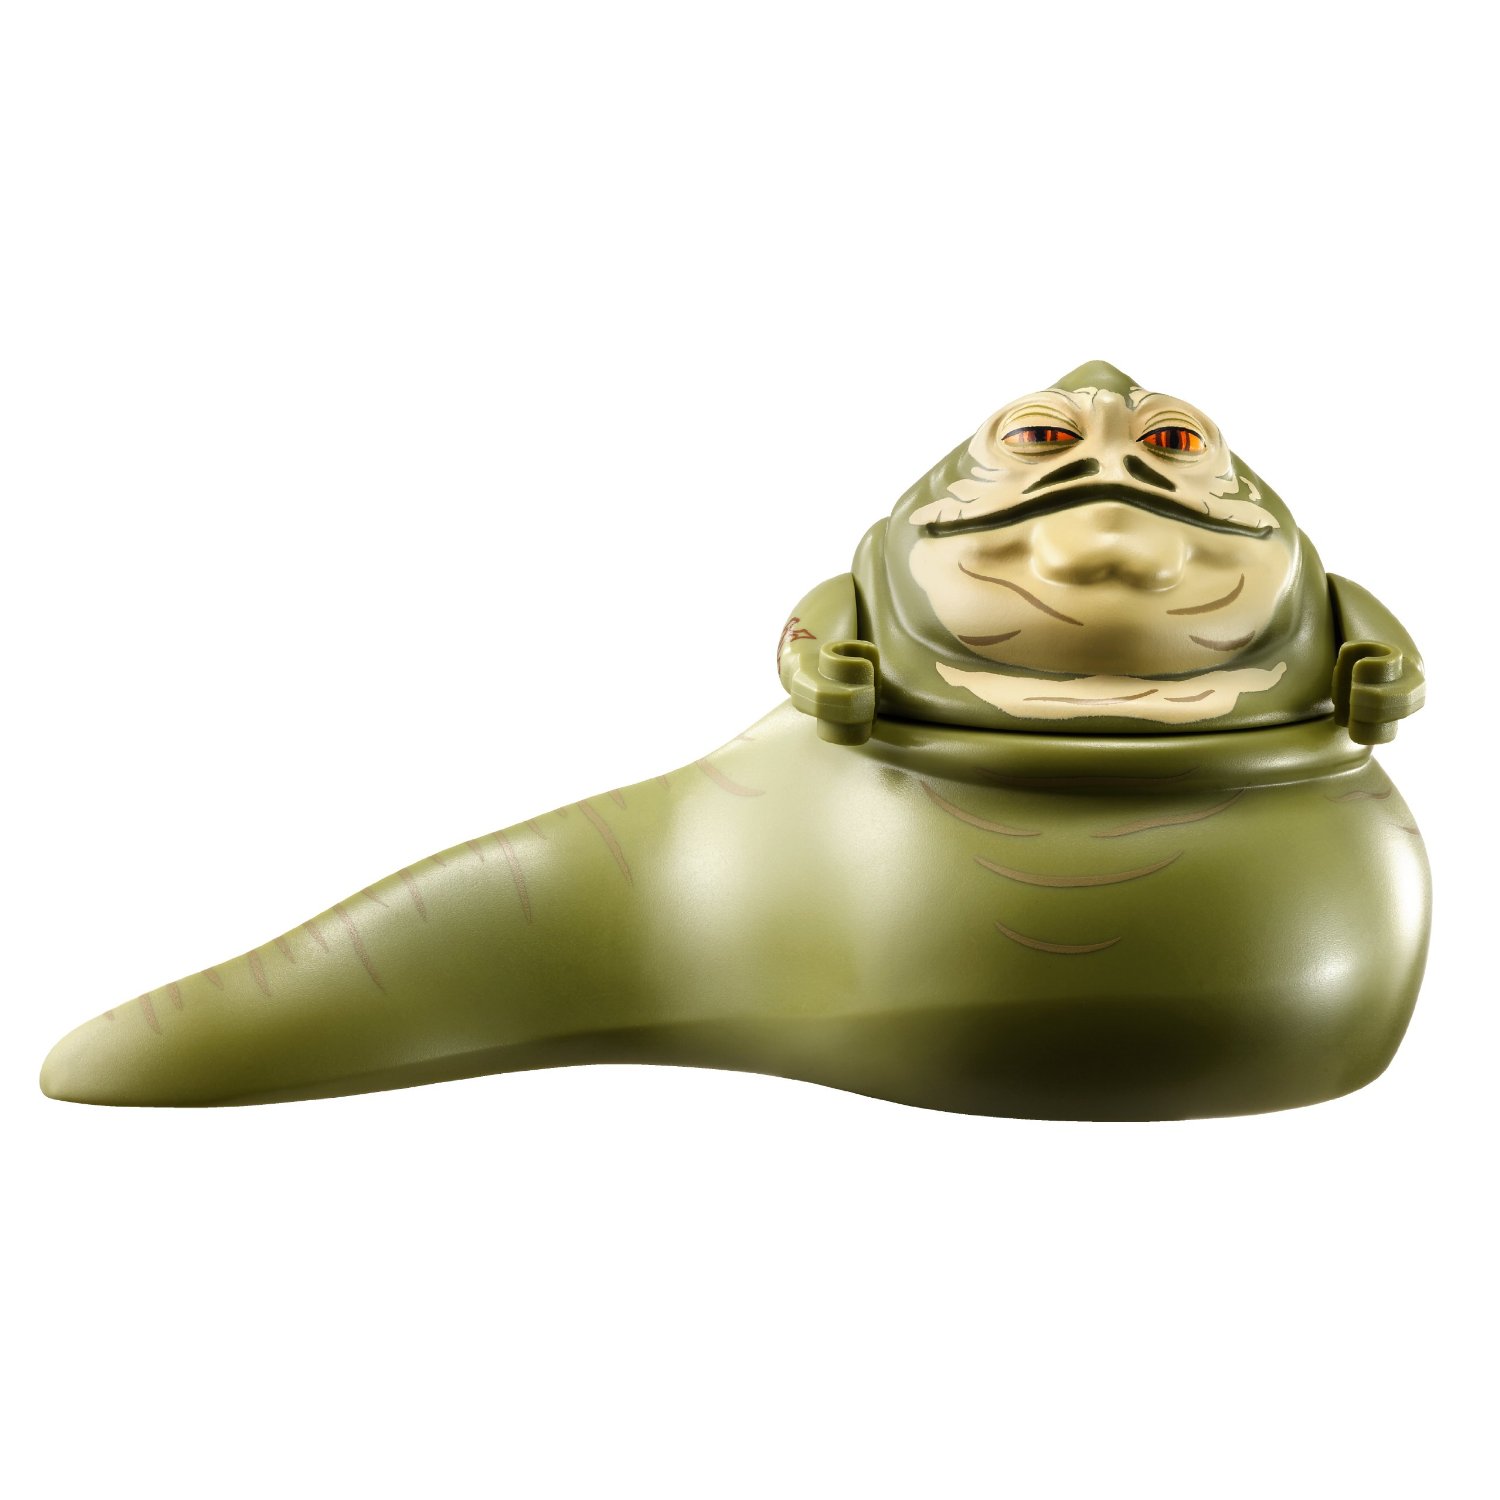 Jabba the Hutt - Lego Star Wars Wiki - Lego, Star Wars, toys, and more